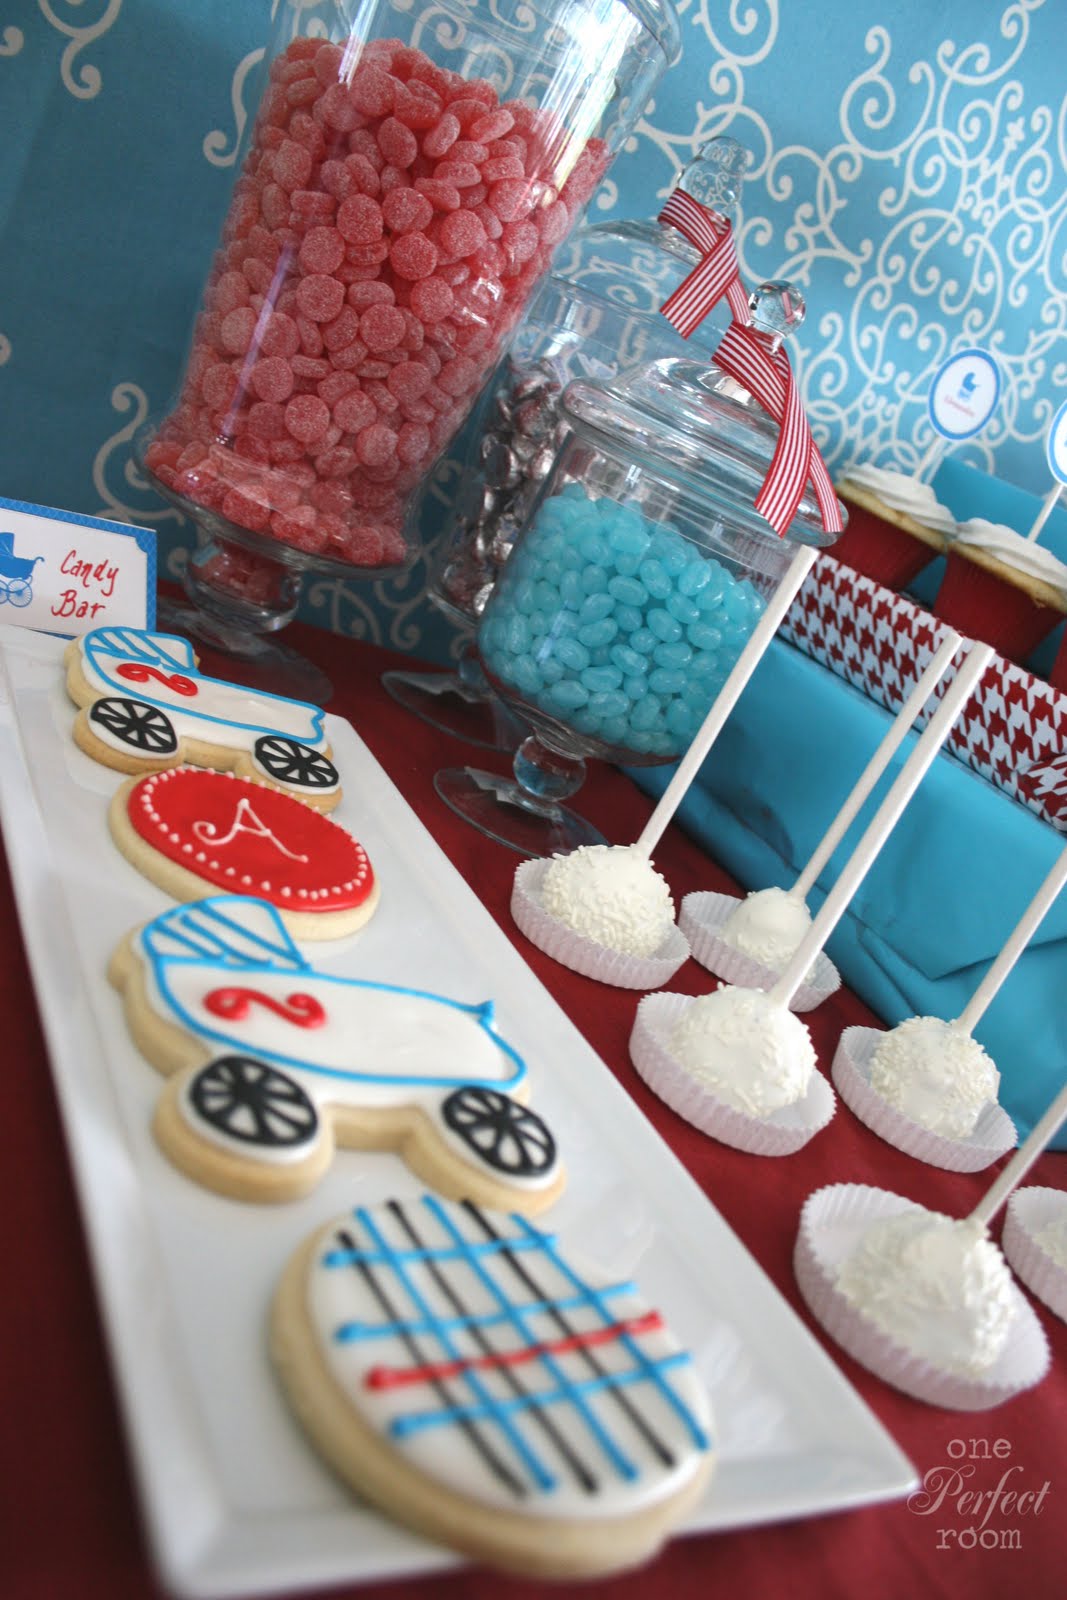 One Perfect Room : Vintage stroller baby shower